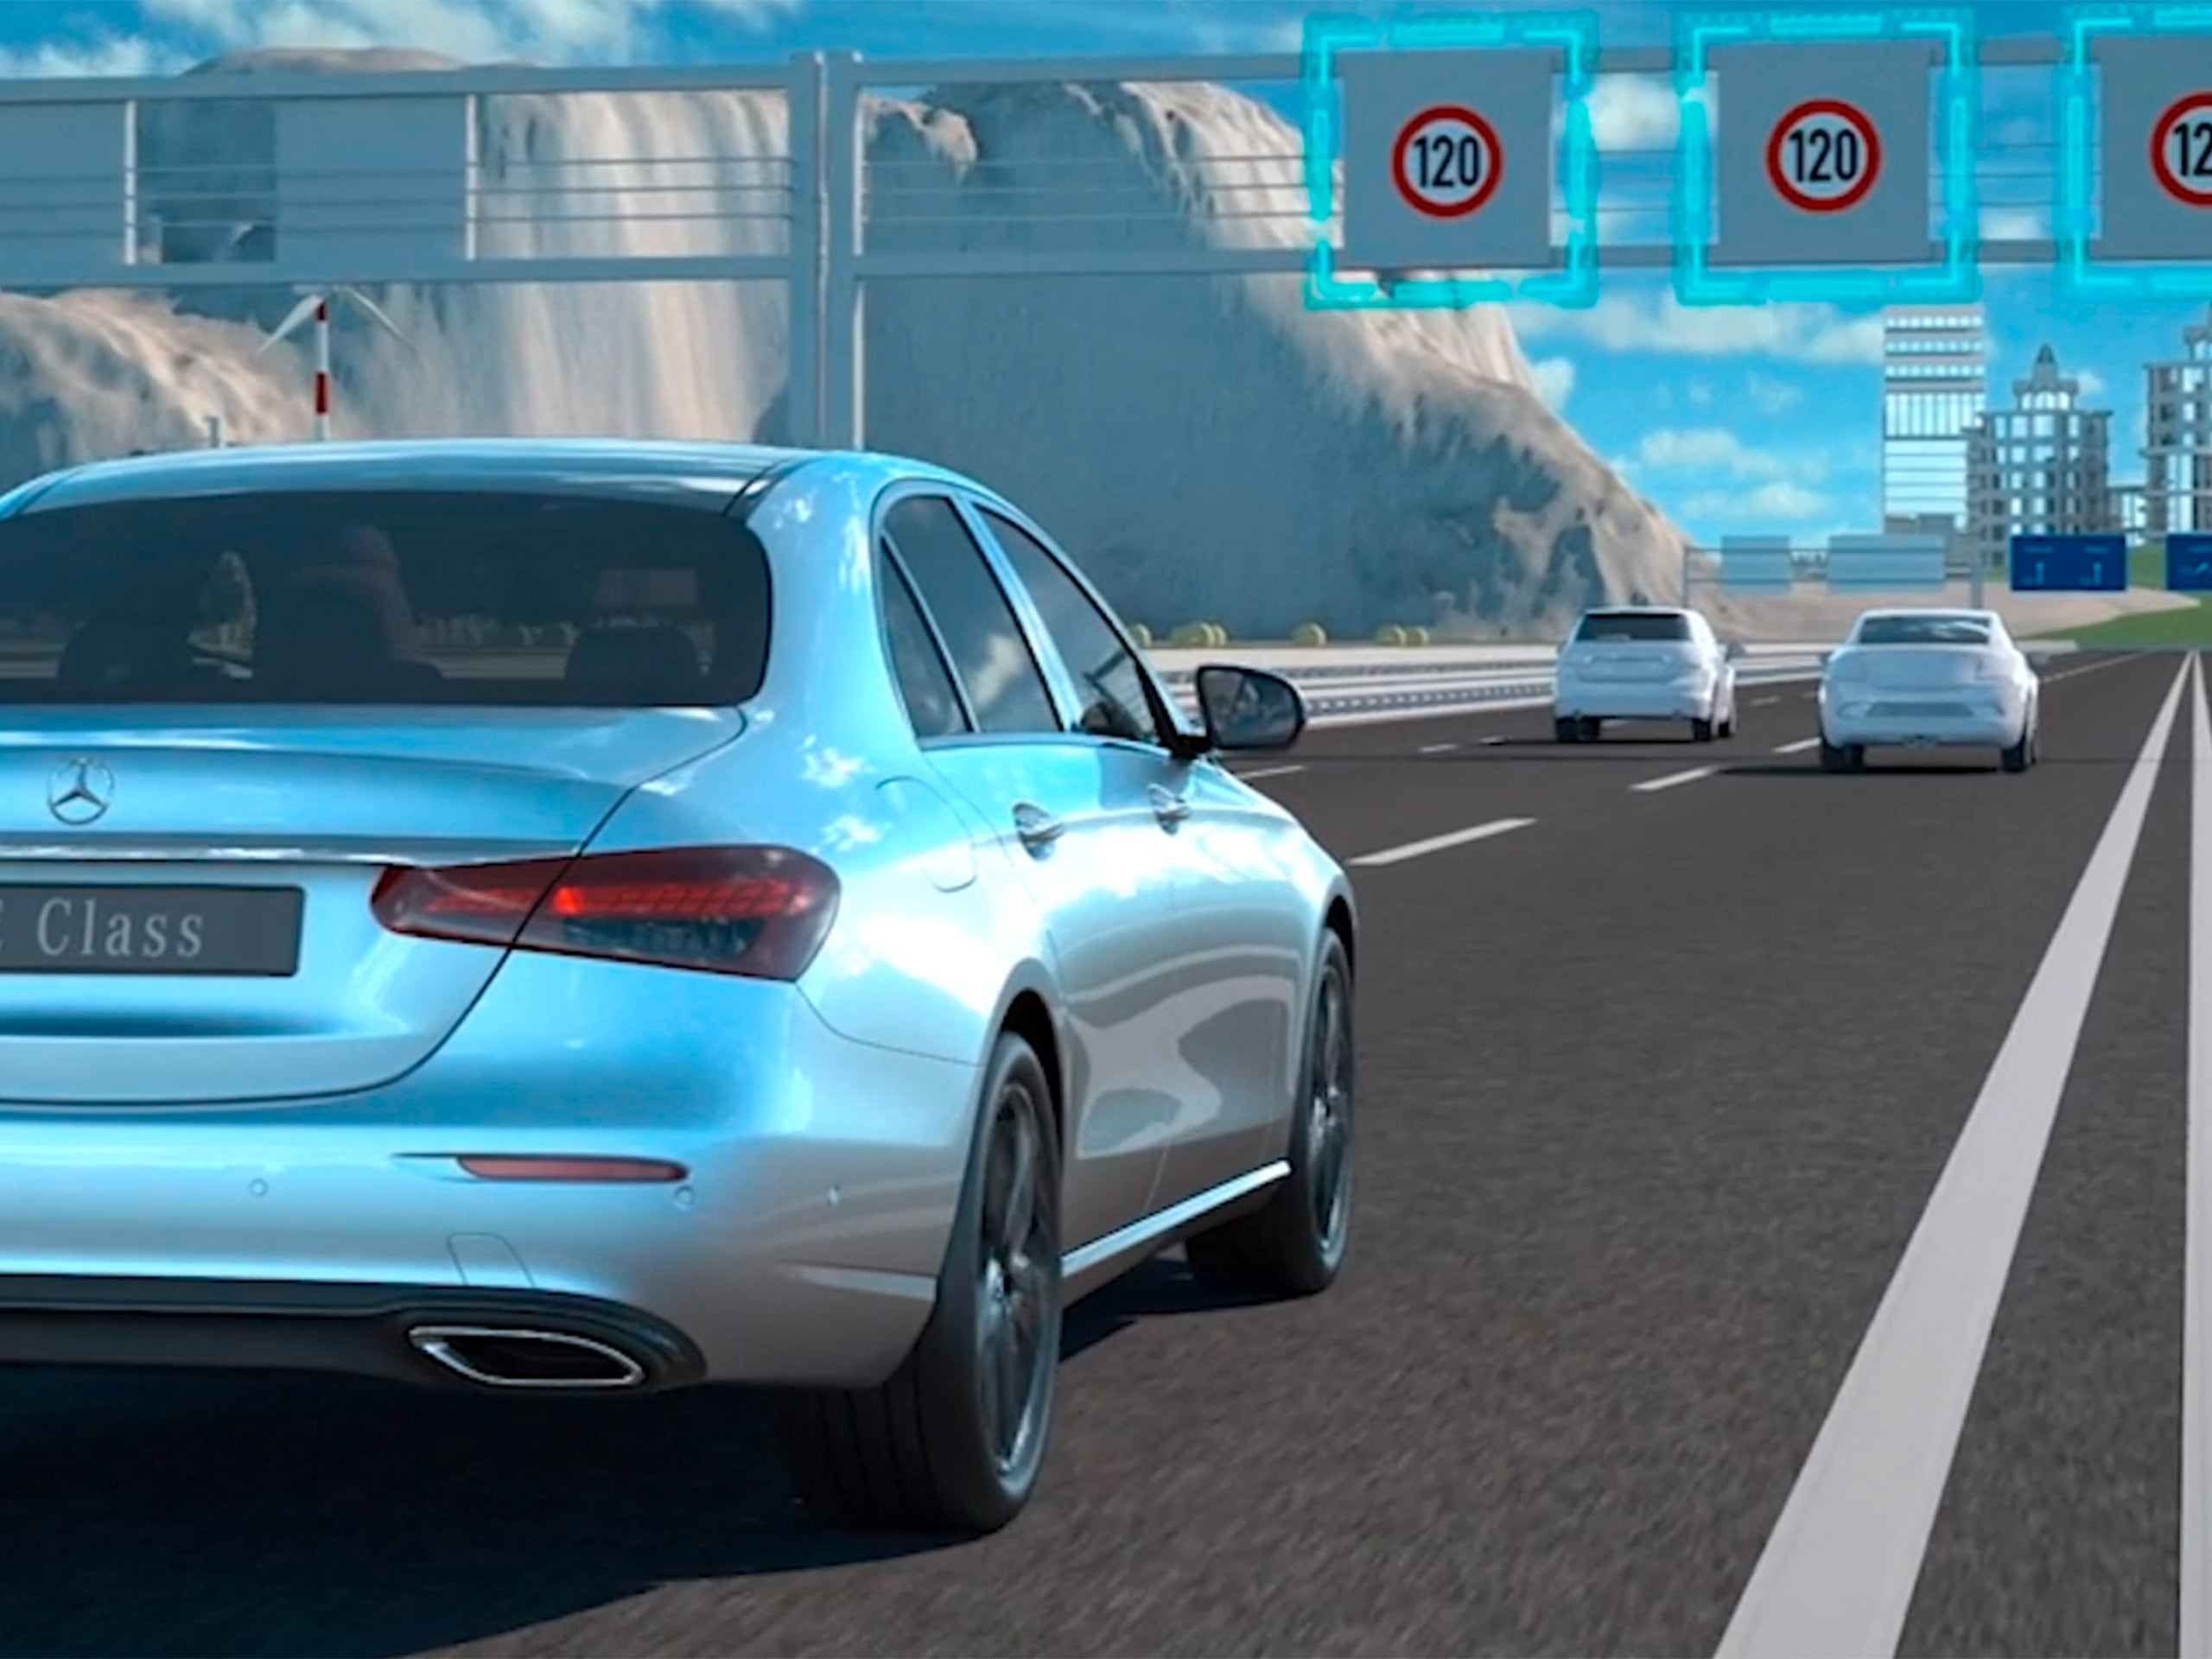 The video shows the function of Active Speed Limit Assist in the Mercedes-Benz CLS Coupé.